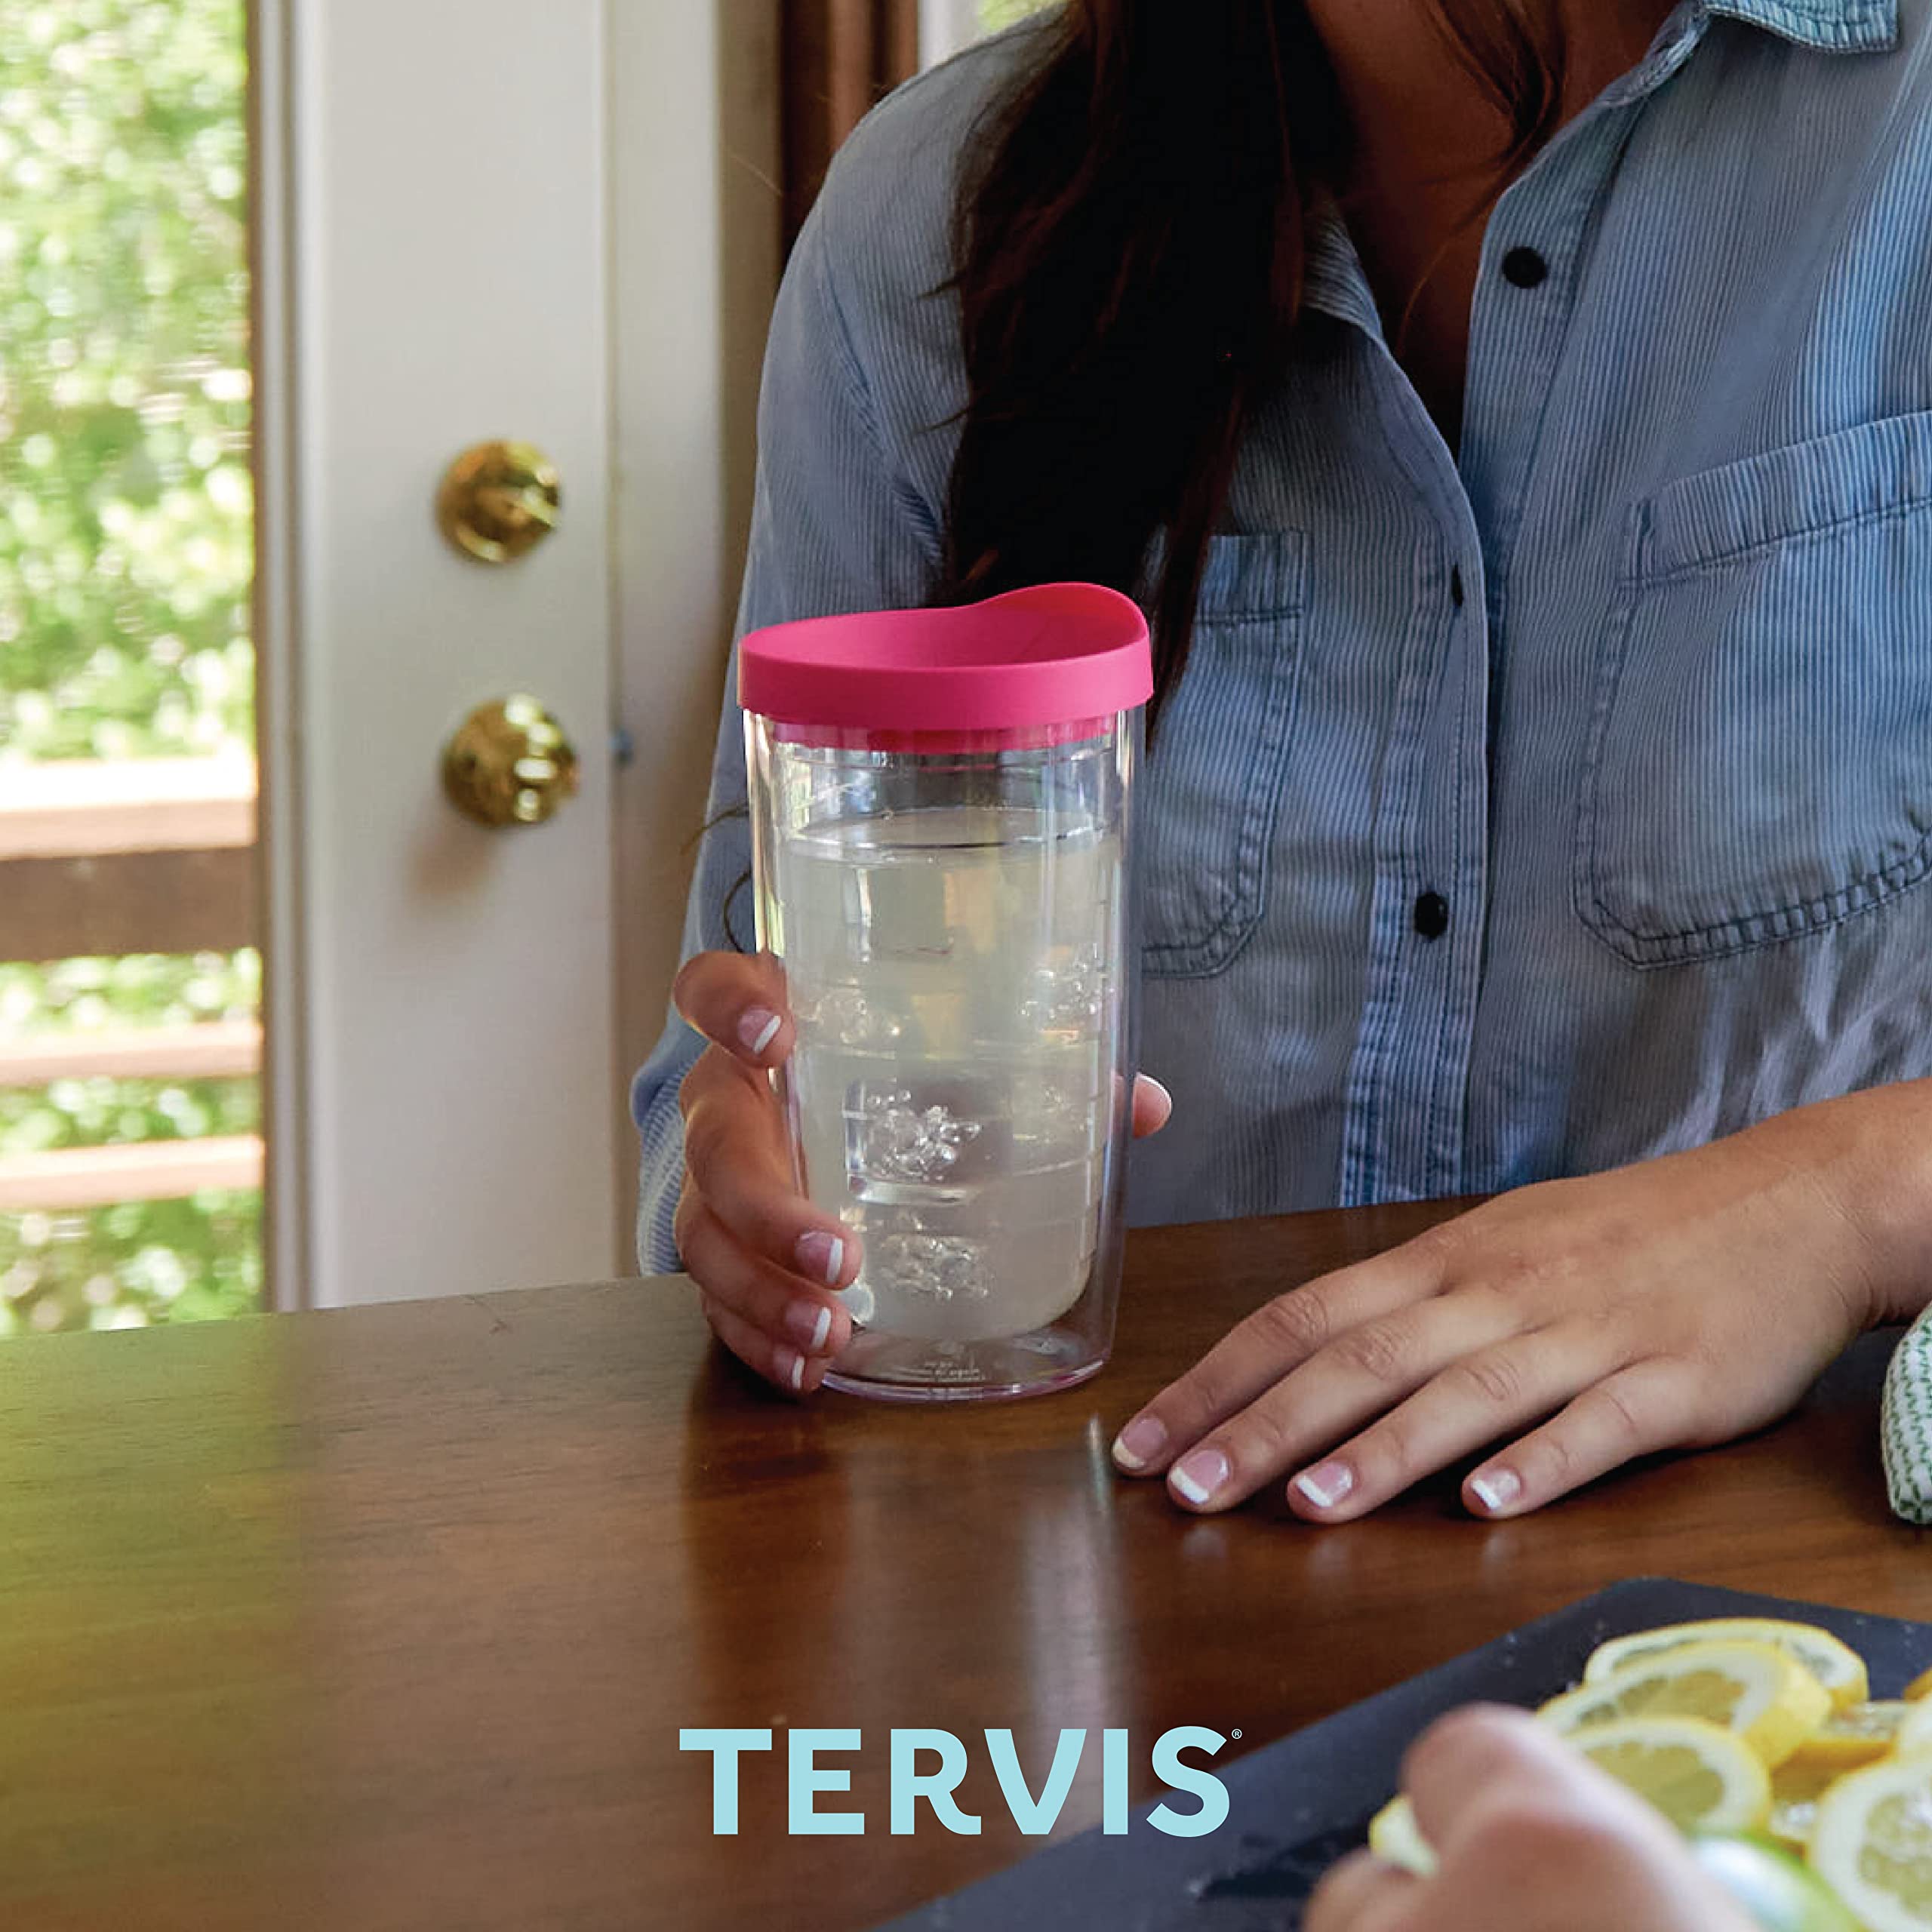 Tervis Made in USA Double Walled Clear & Colorful Tabletop Insulated Tumbler Cup Keeps Drinks Cold & Hot, 16oz - 4pk, Assorted